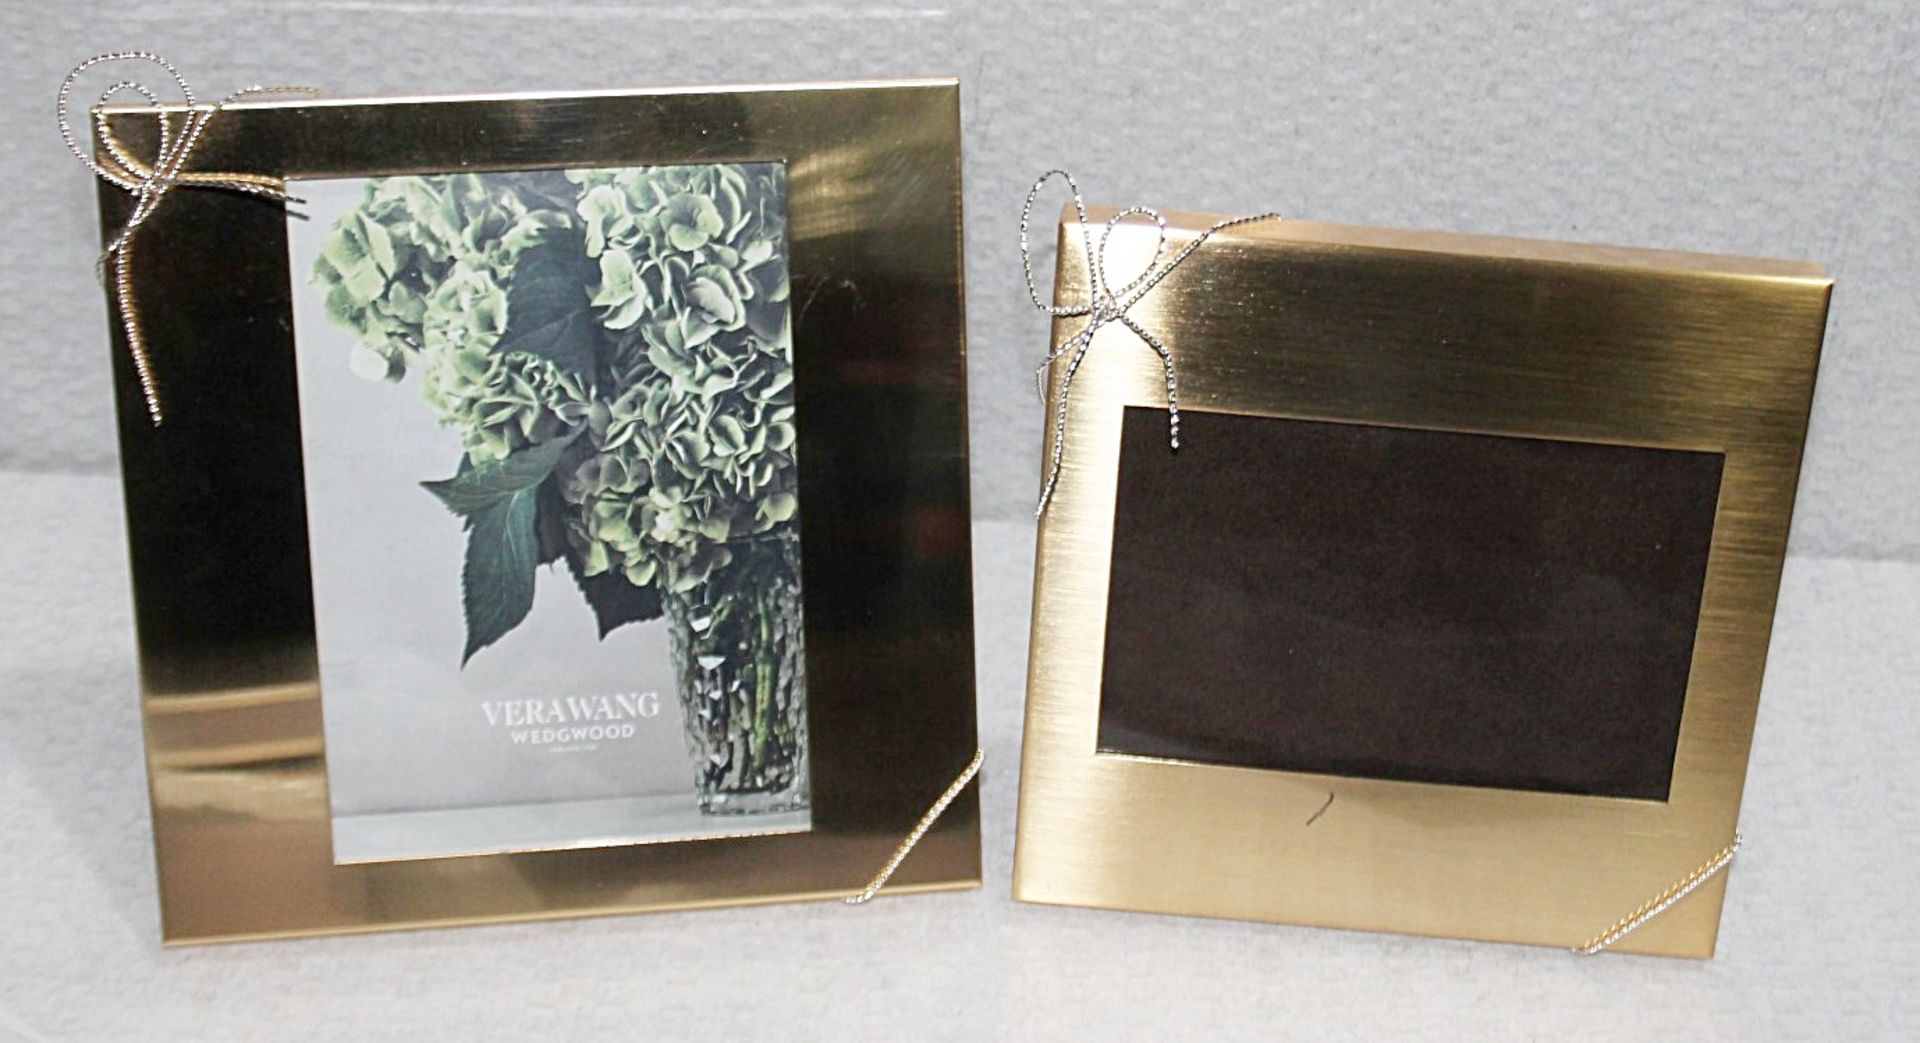 2 x VERA WANG / WEDGWOOD 'Love Knots' Gold Photo Frames - 2 Sizes Included - Total Original Price £ - Image 5 of 6